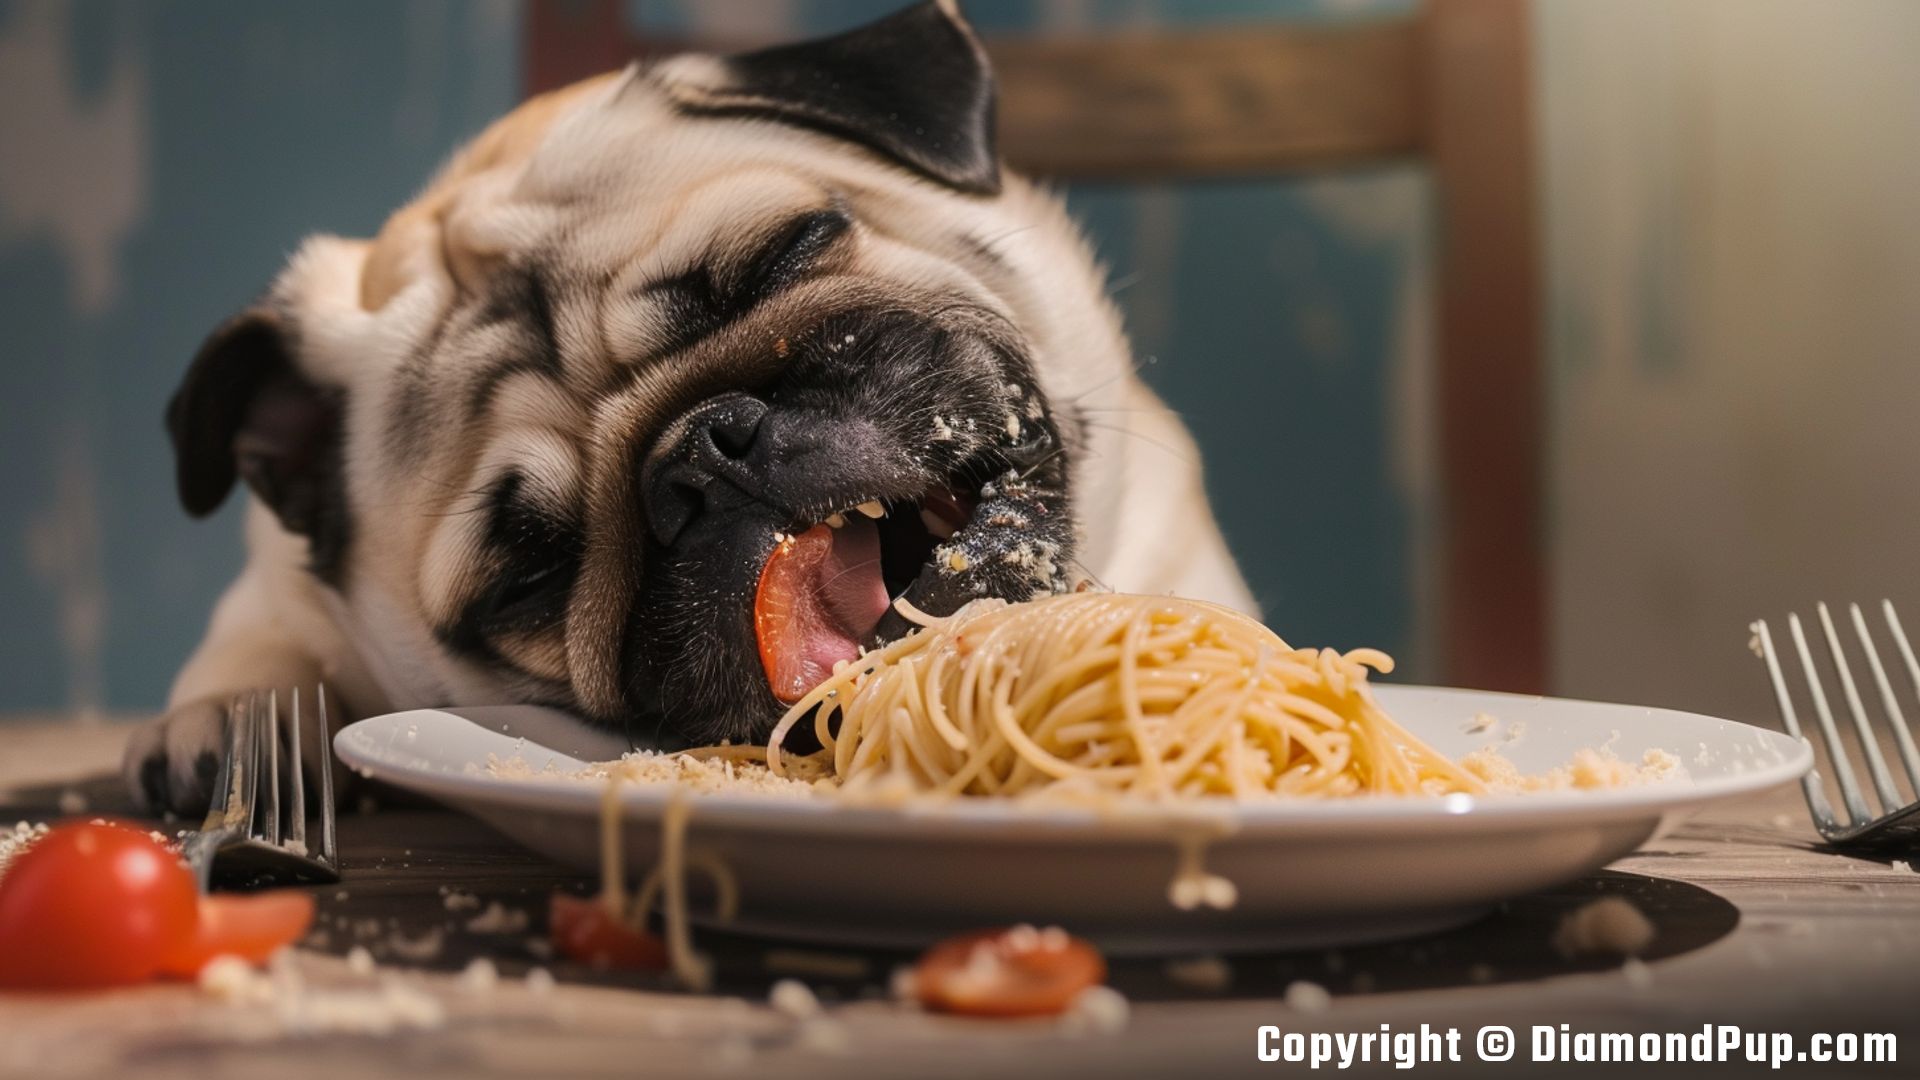 Image of a Cute Pug Eating Pasta